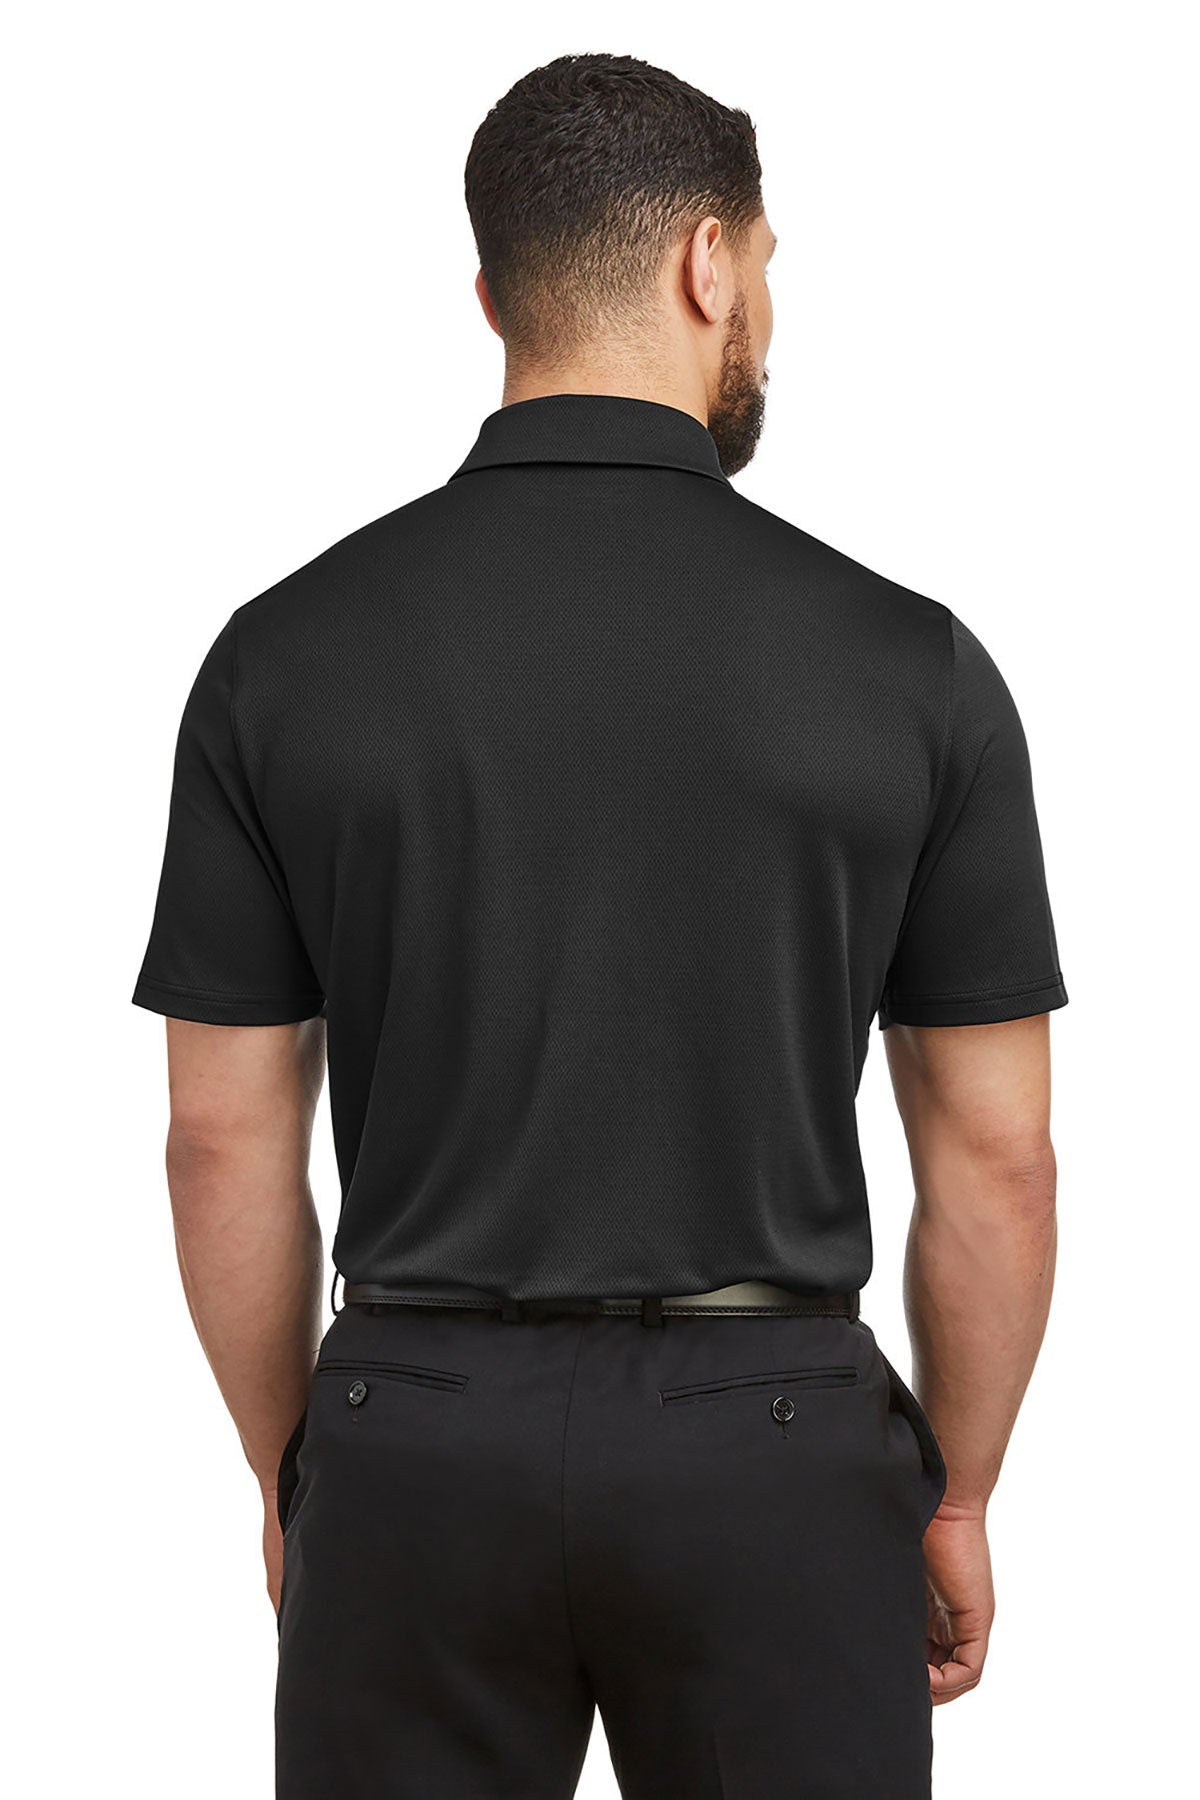 Under Armour Men's Tech Polo, Black [GuidePoint Security]